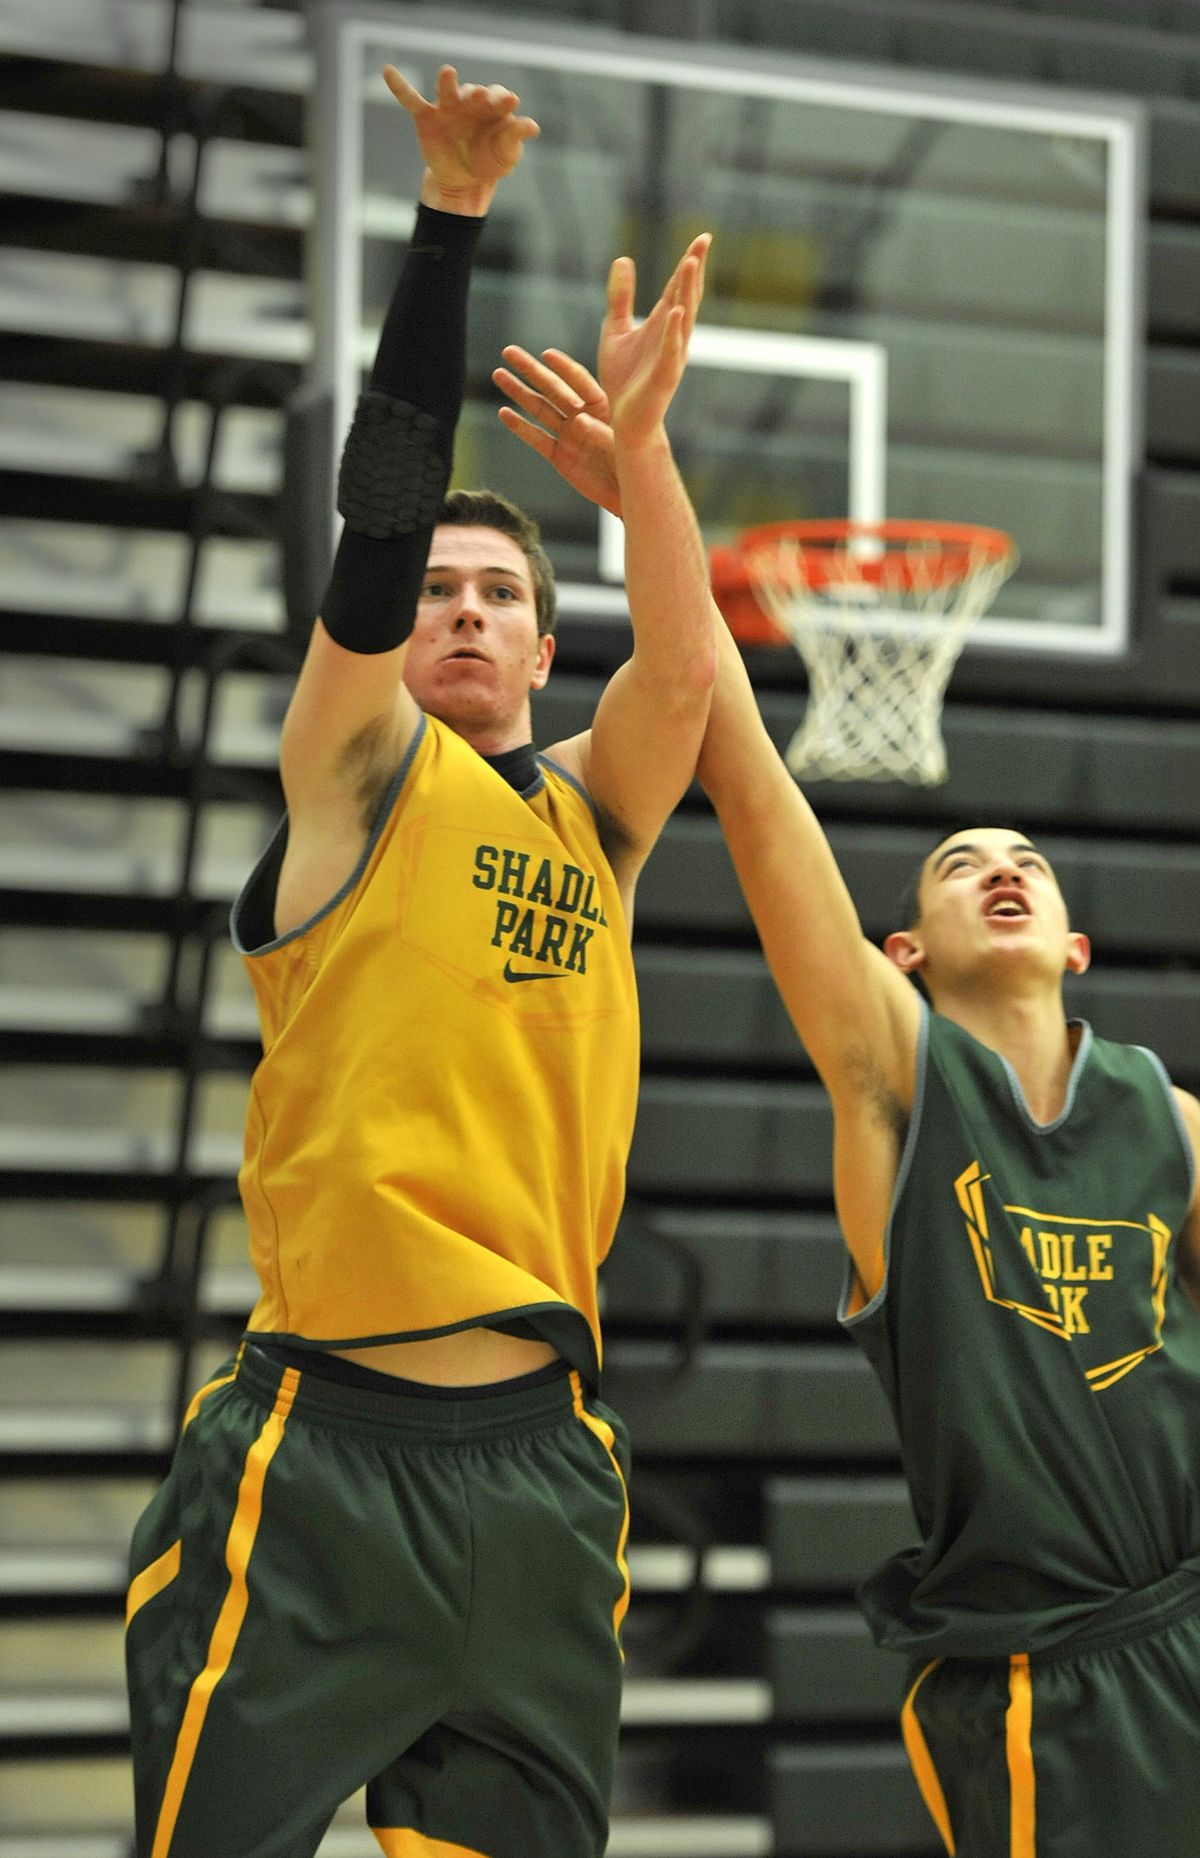 Shadle Park’s Brett Boese, shooting over George Pilimai during practice, is committed to WSU. (Dan Pelle)